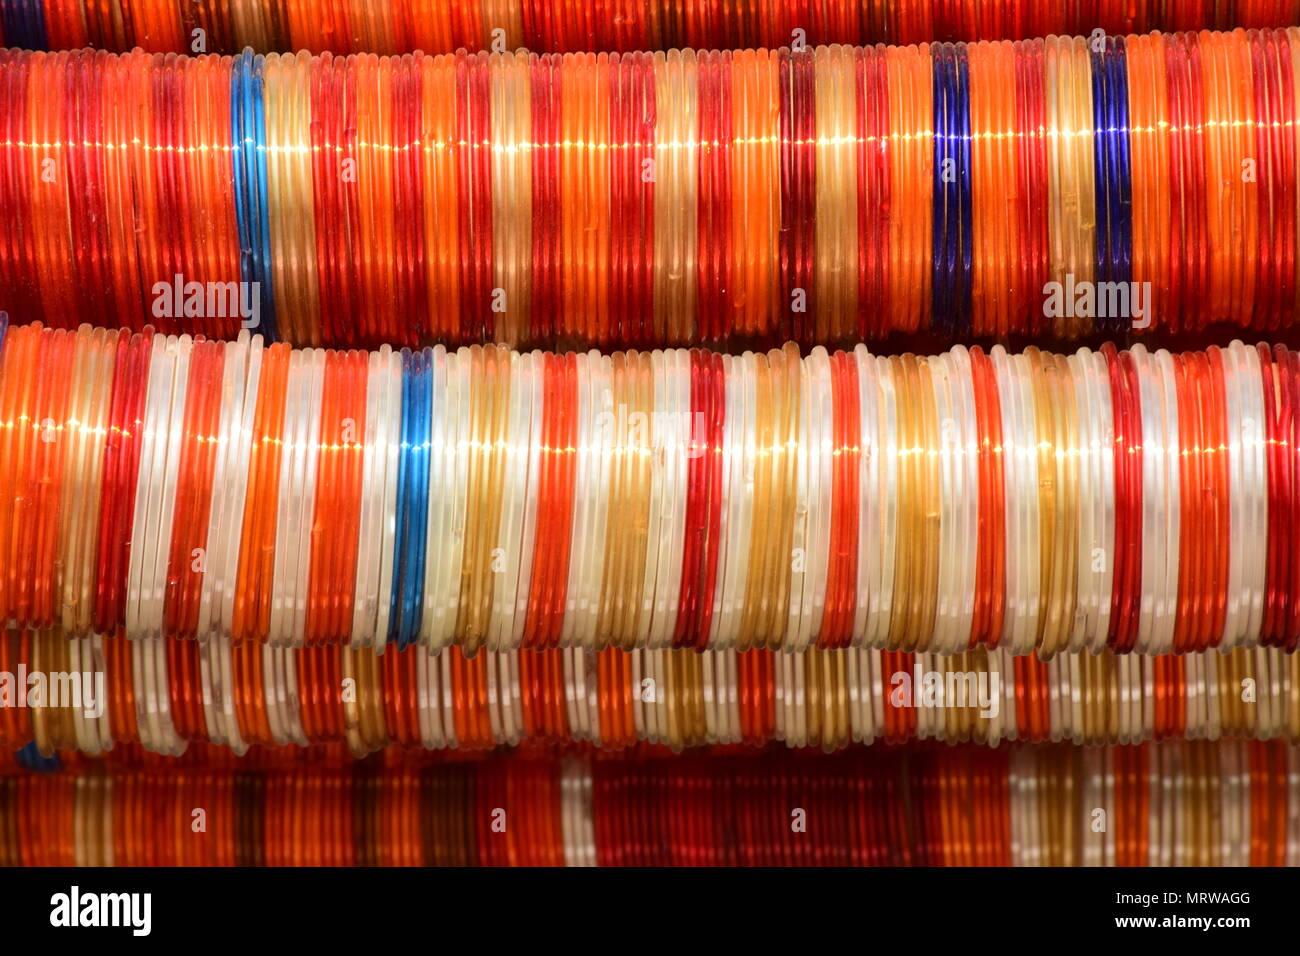 Traditional Indian colorful bangles Stock Photo